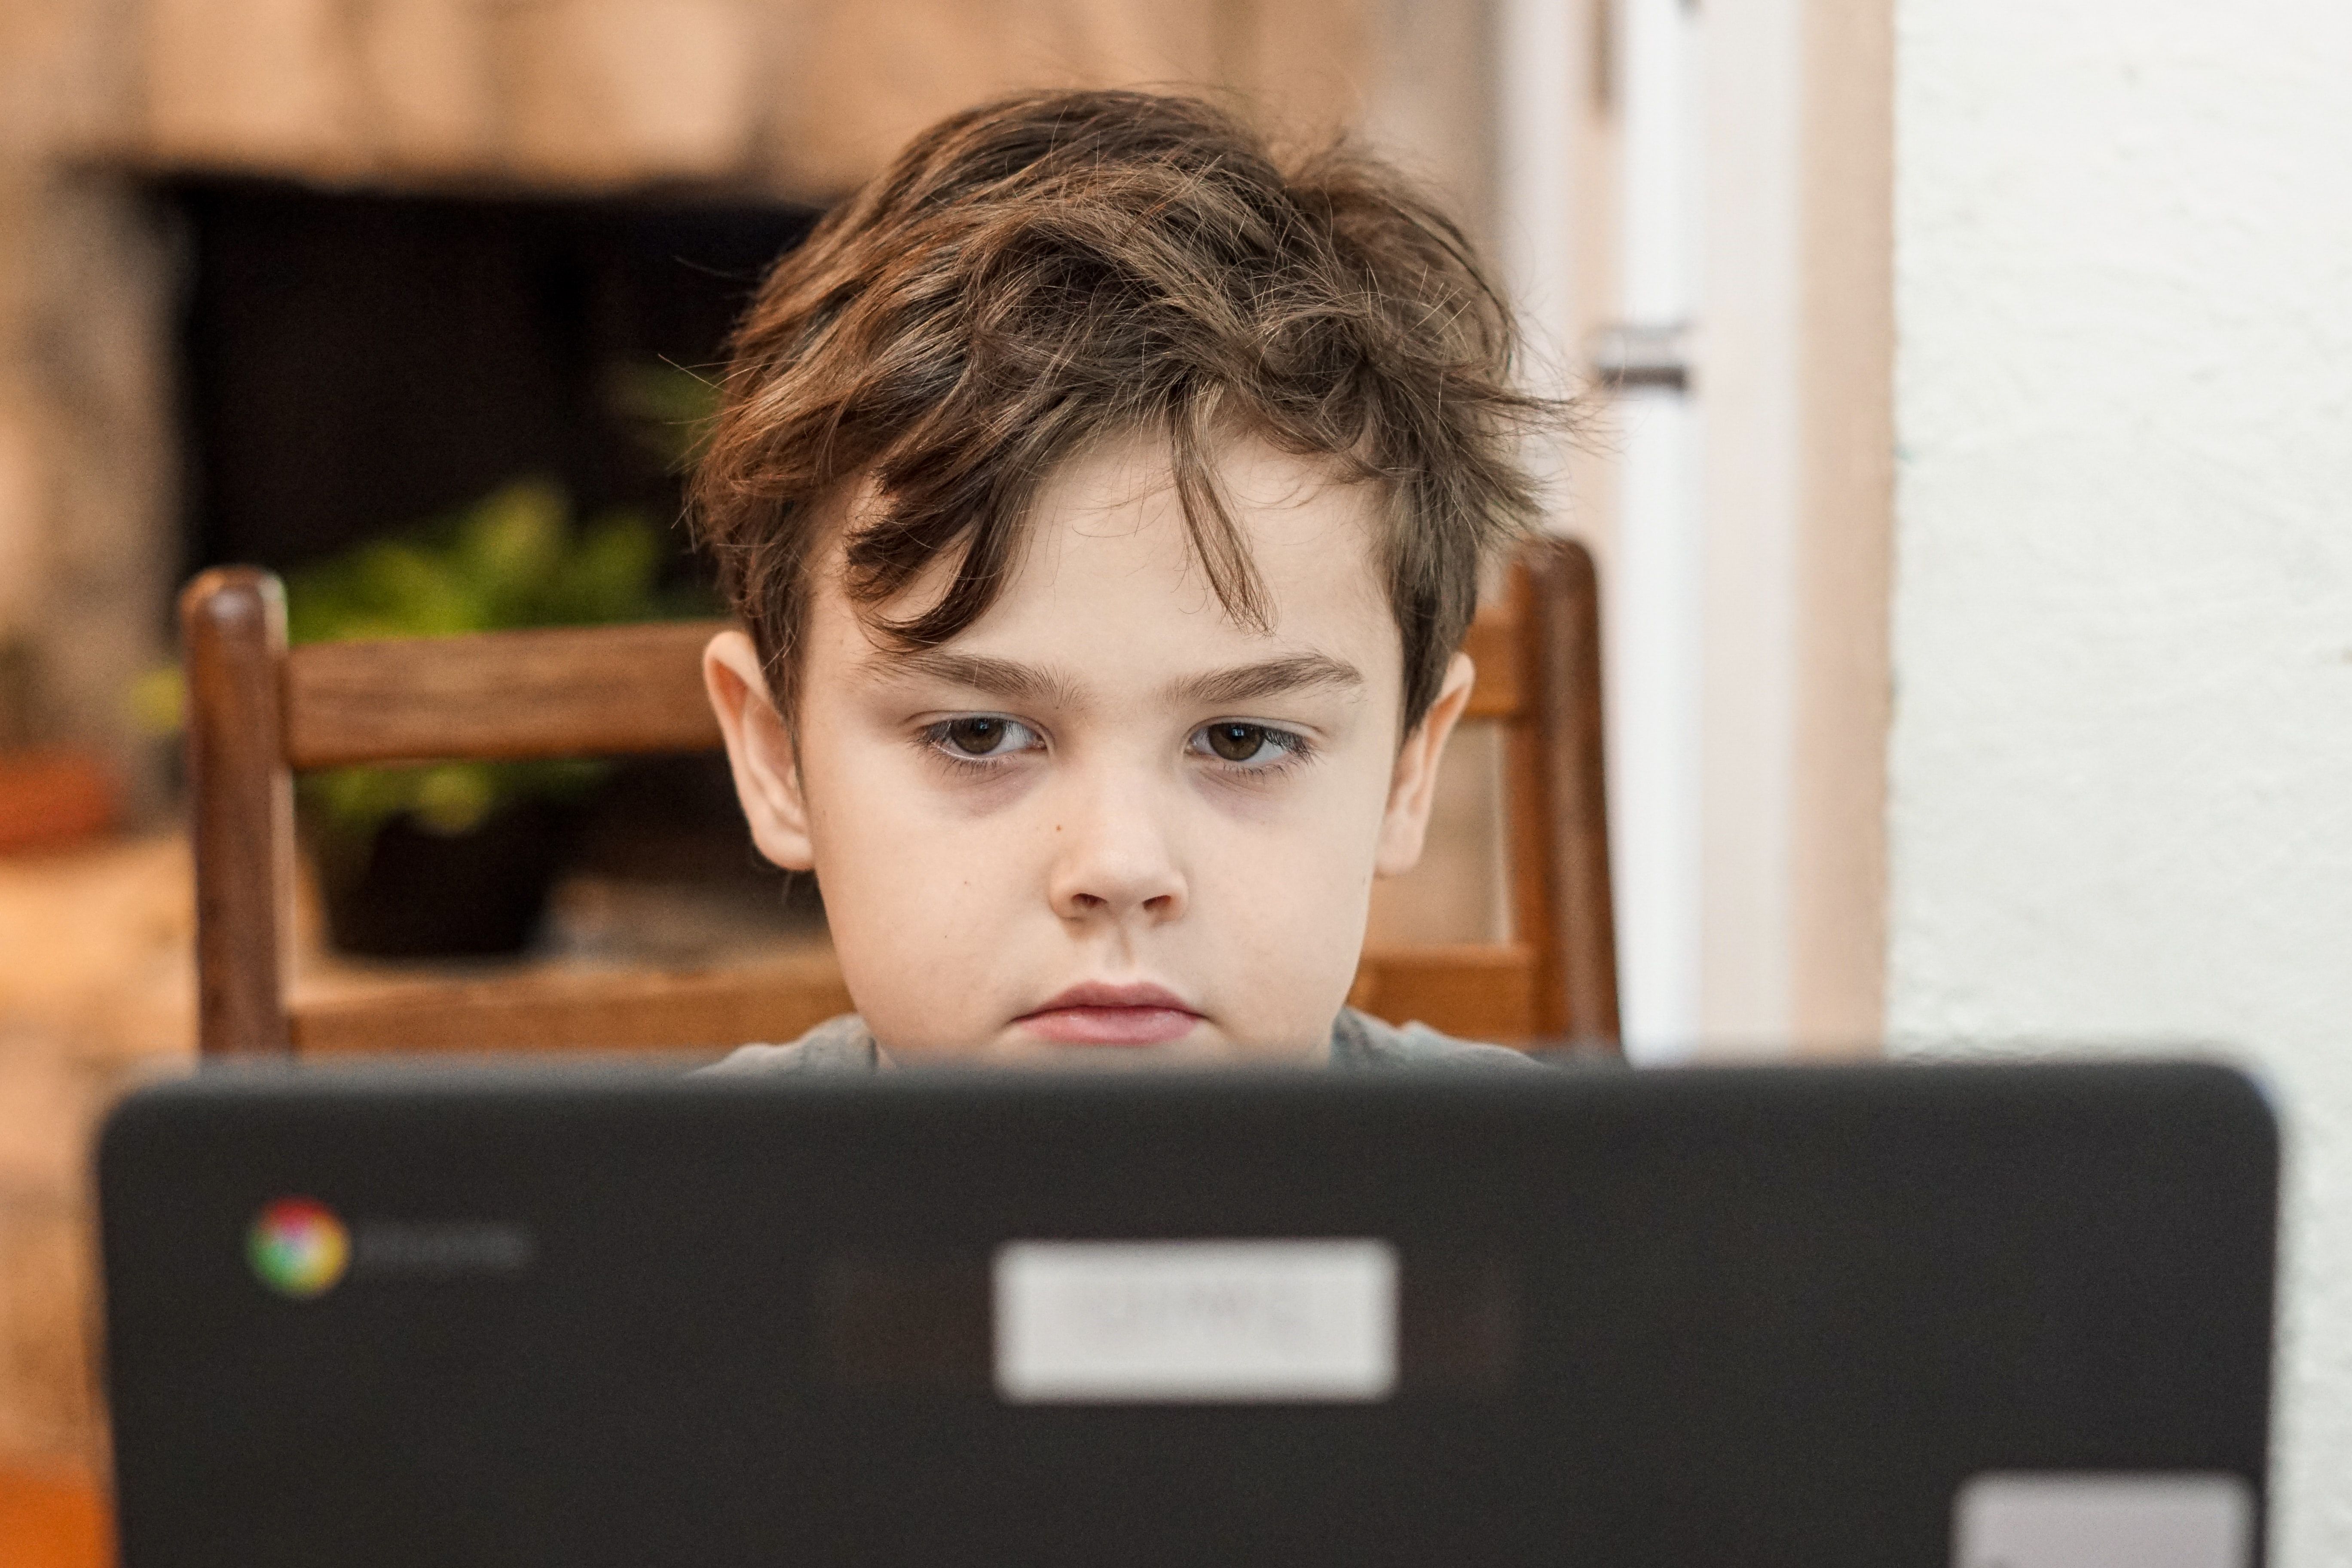 Kindergarten boy sits on a wooden chair at home, looking at his laptop while attending virtual school.